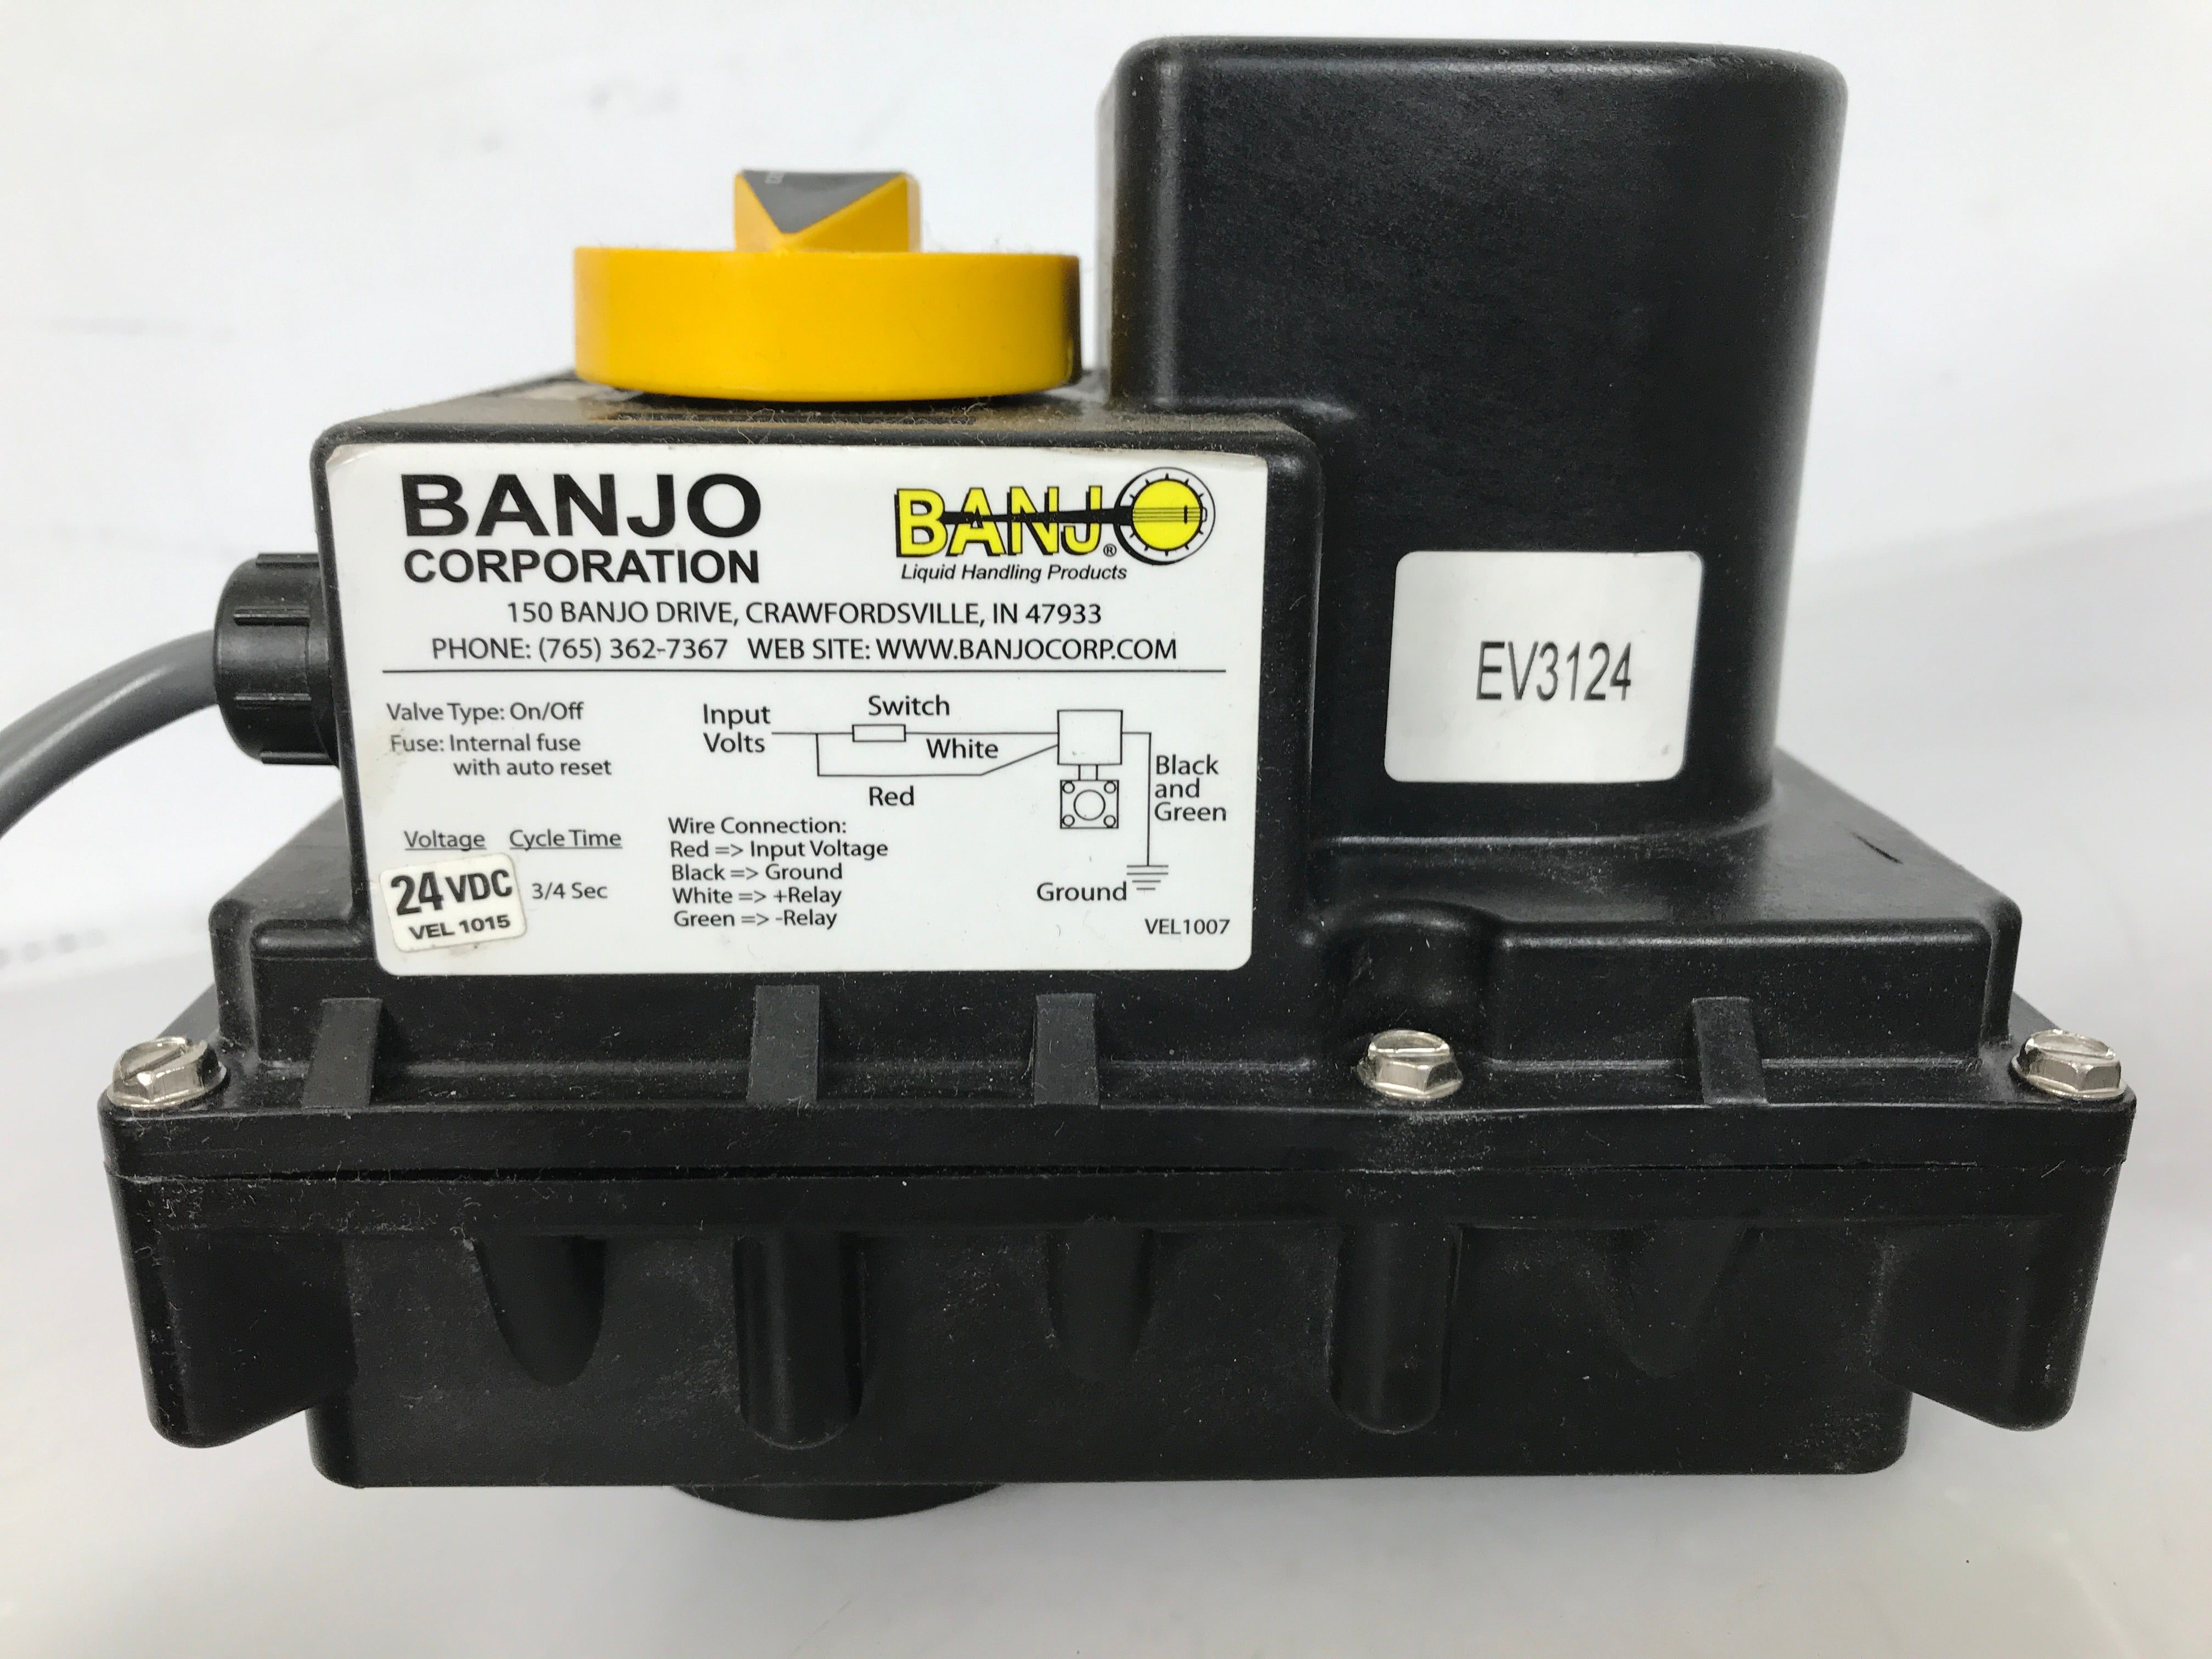 Banjo EV3124 Electric Valve with Extra Fittings *For Parts or Repair*